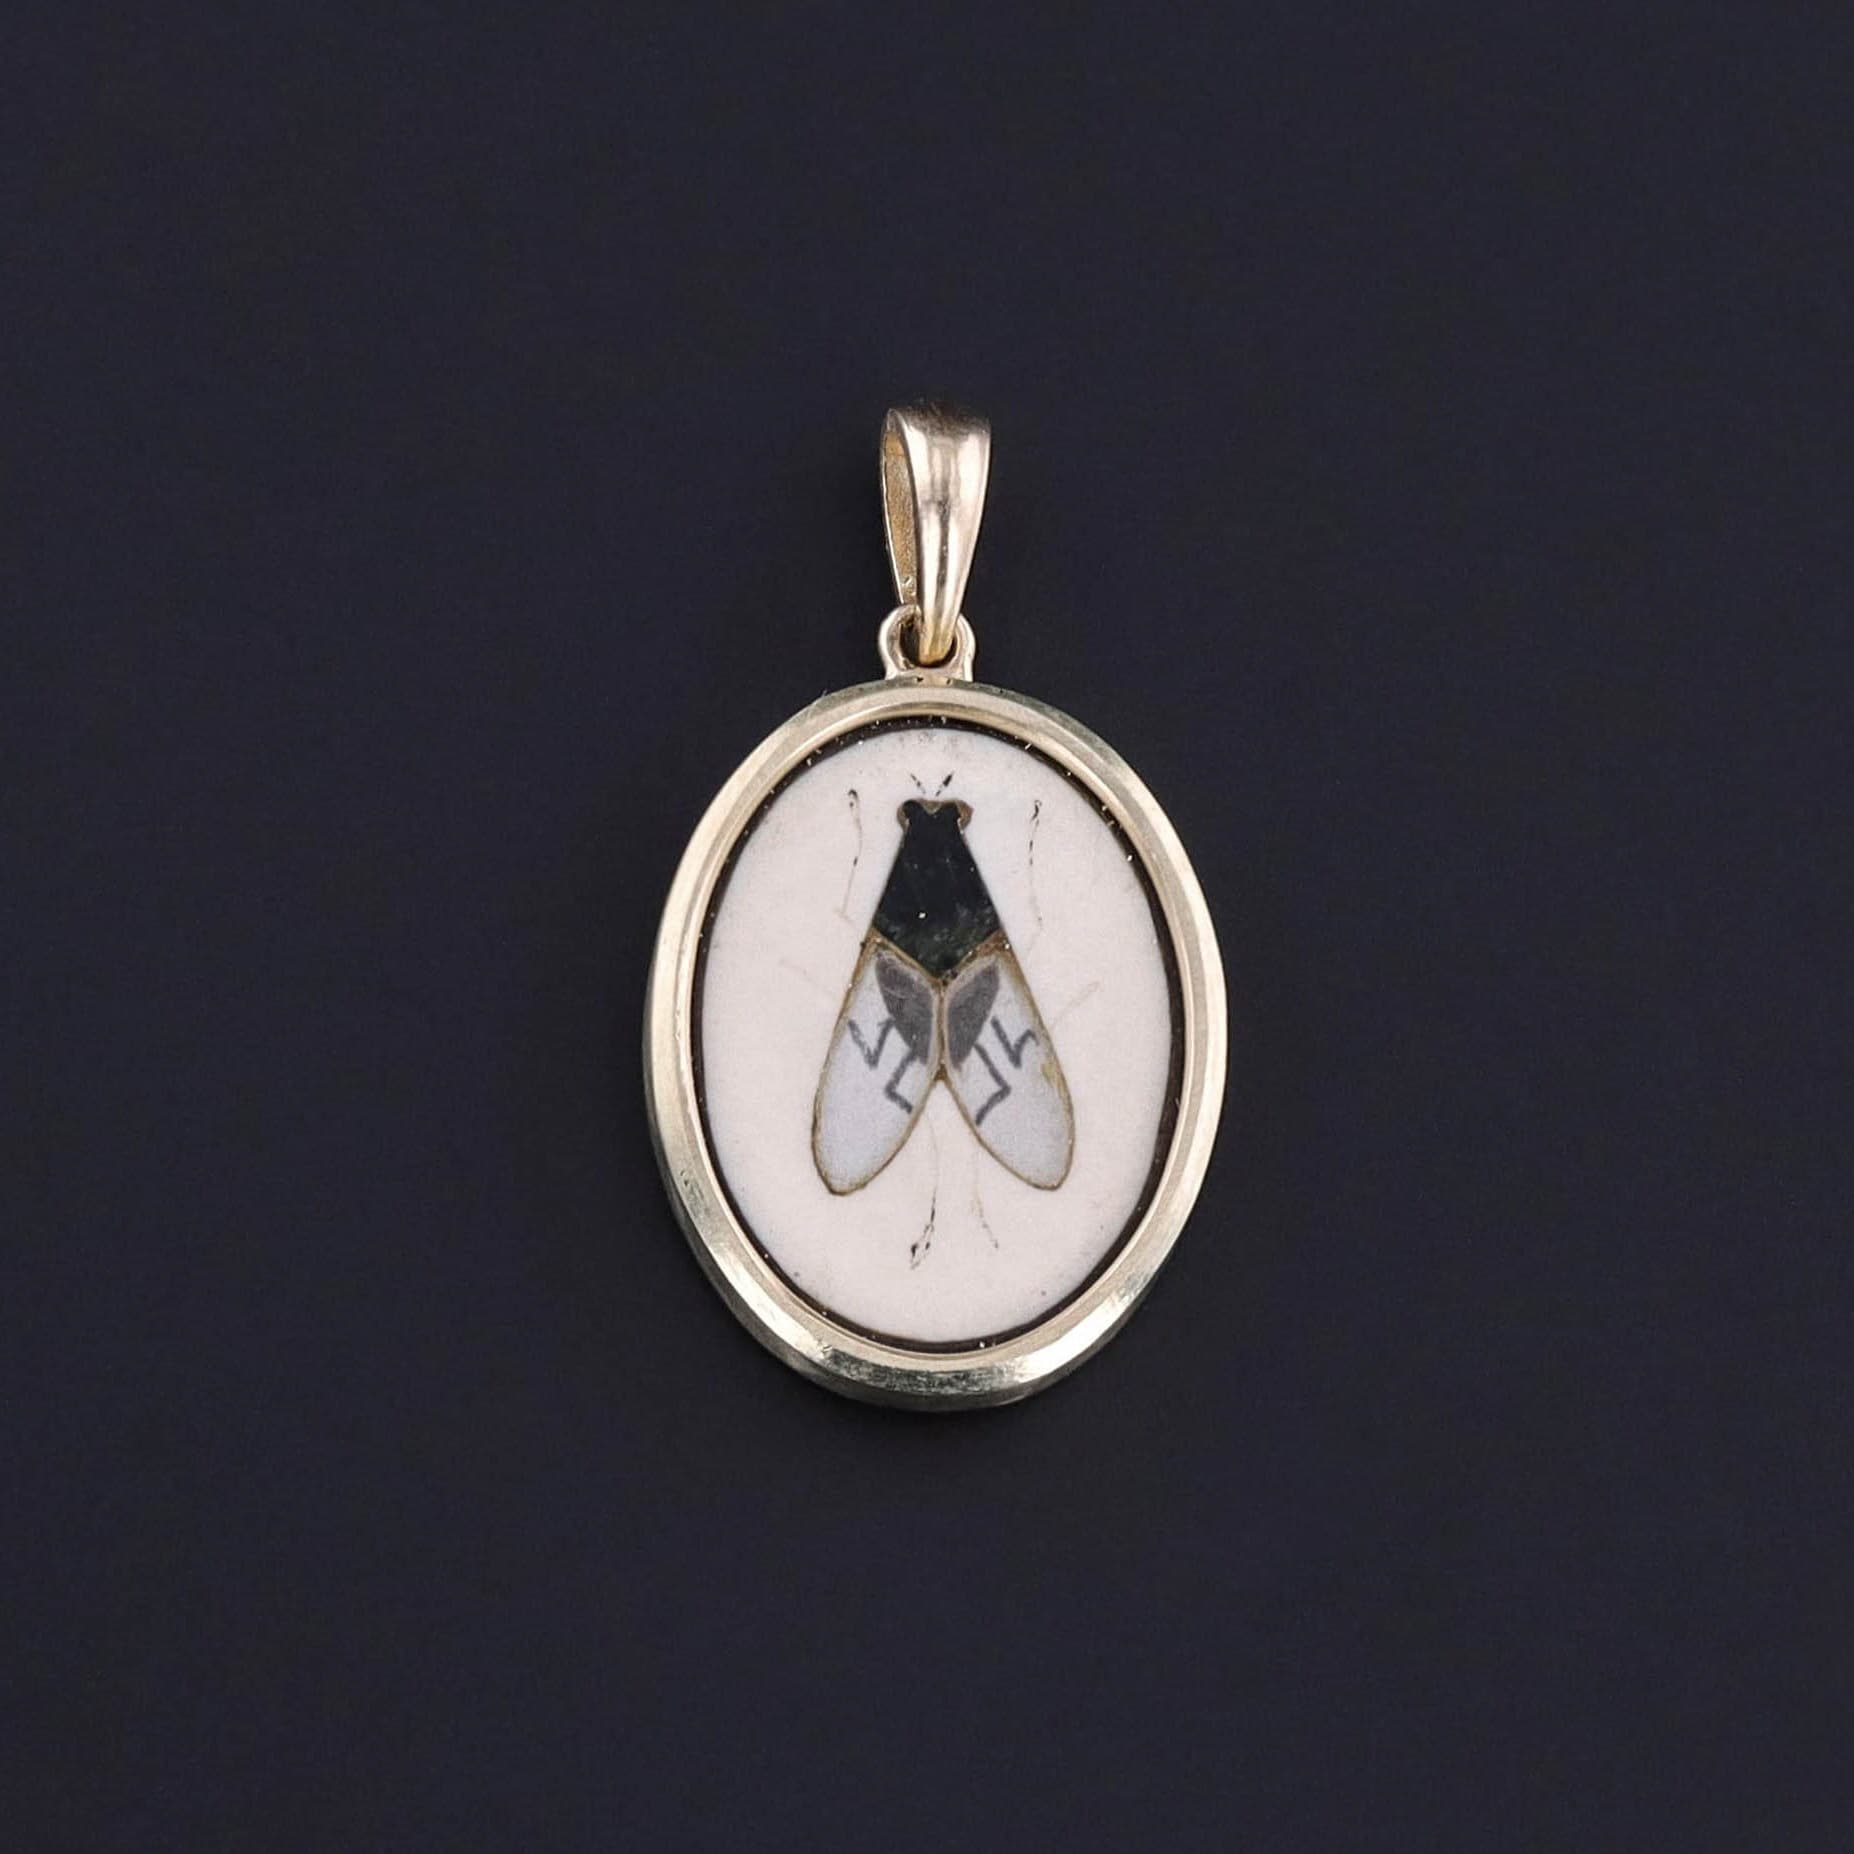 An antique pietra dura fly pendant in 14k gold. This is similar to shibayama but not raised relief.